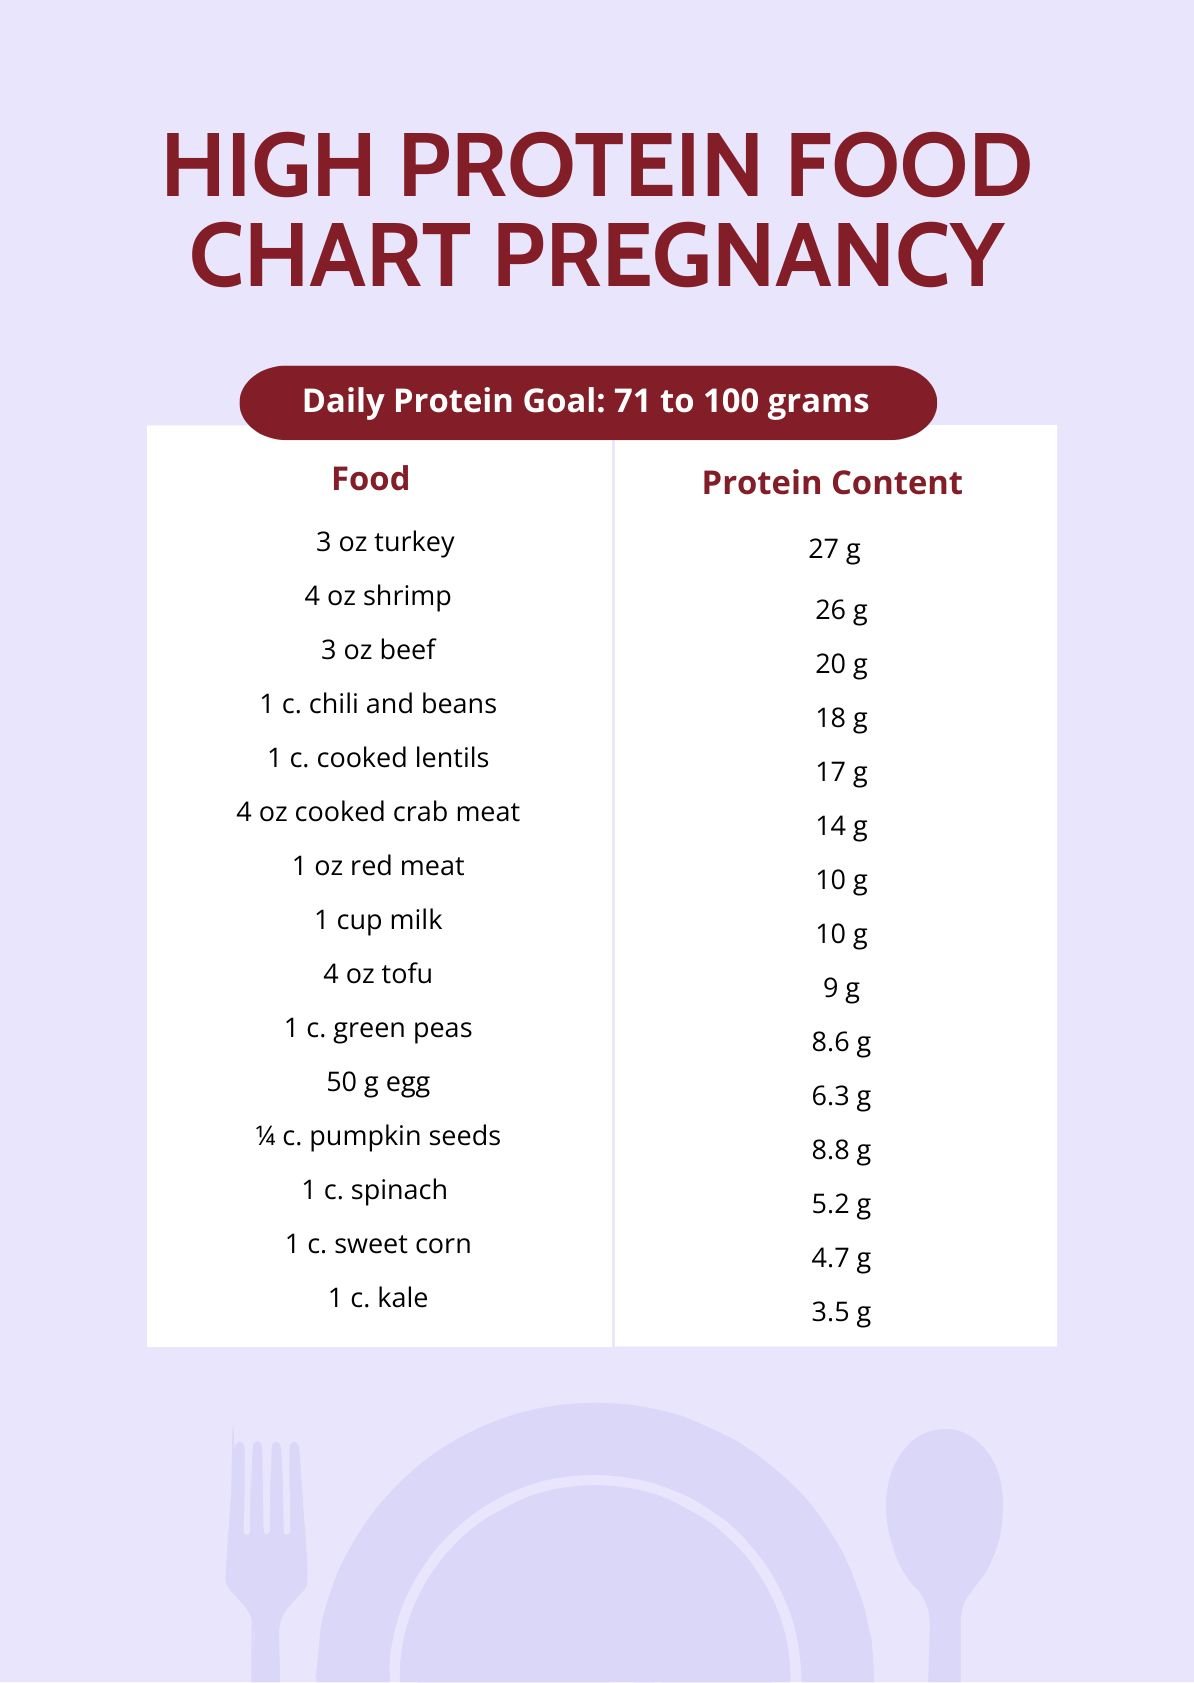 High Protein Food Chart Pregnancy